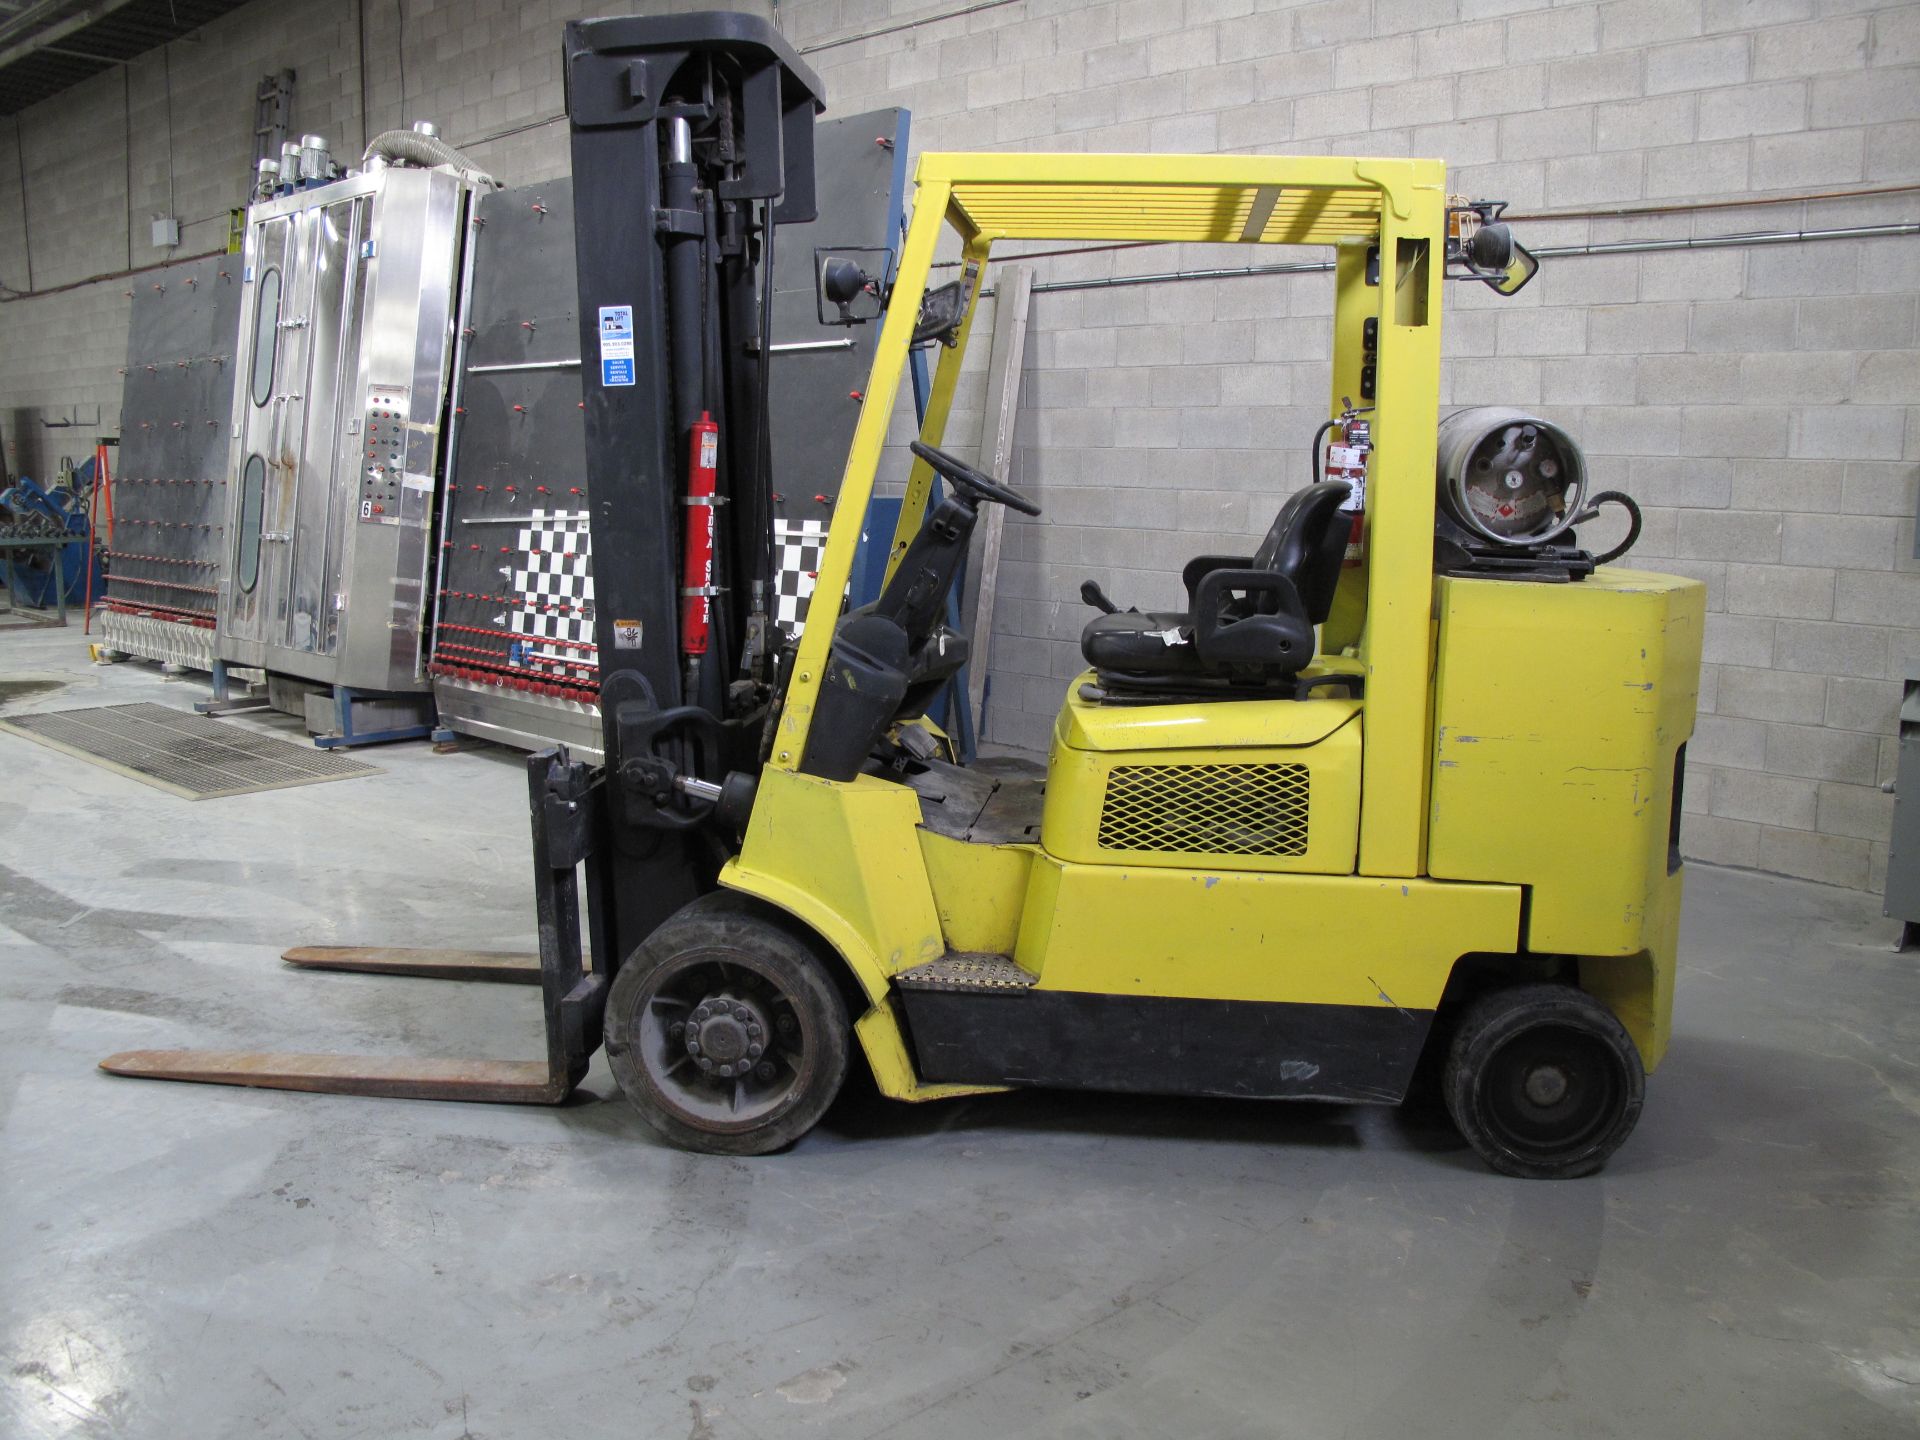 HYSTER, S120XMS-PRS, 12,000 LBS, 3 STAGE, LPG FORKLIFT, 48" FORKS, 208" MAXIMUM LIFT, 9,701 HOURS, - Image 3 of 7